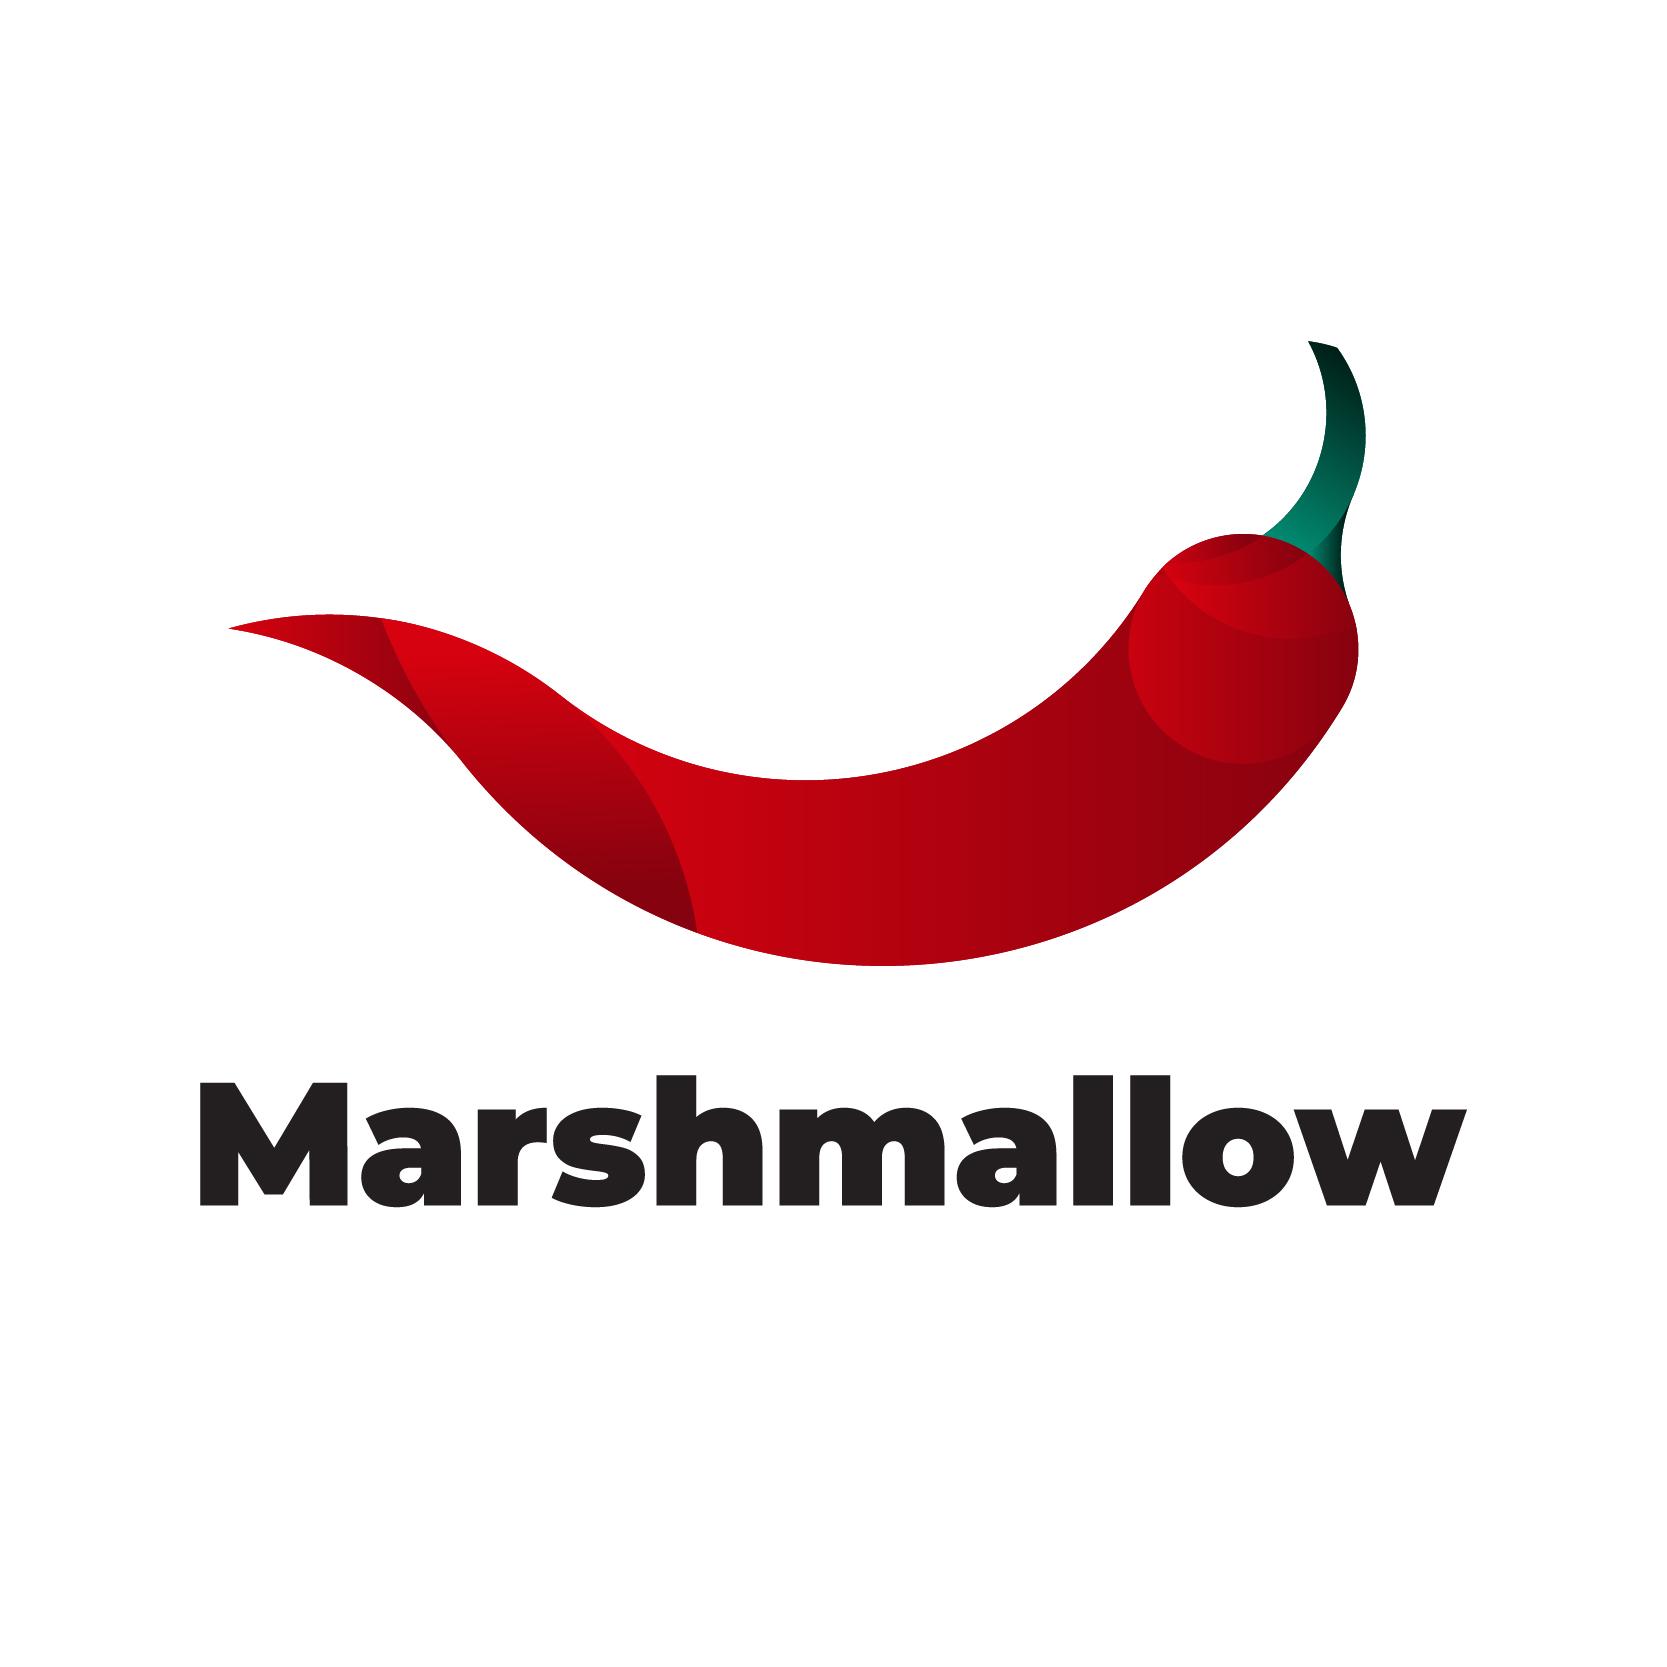 Marshmallow Marketing profile on Qualified.One